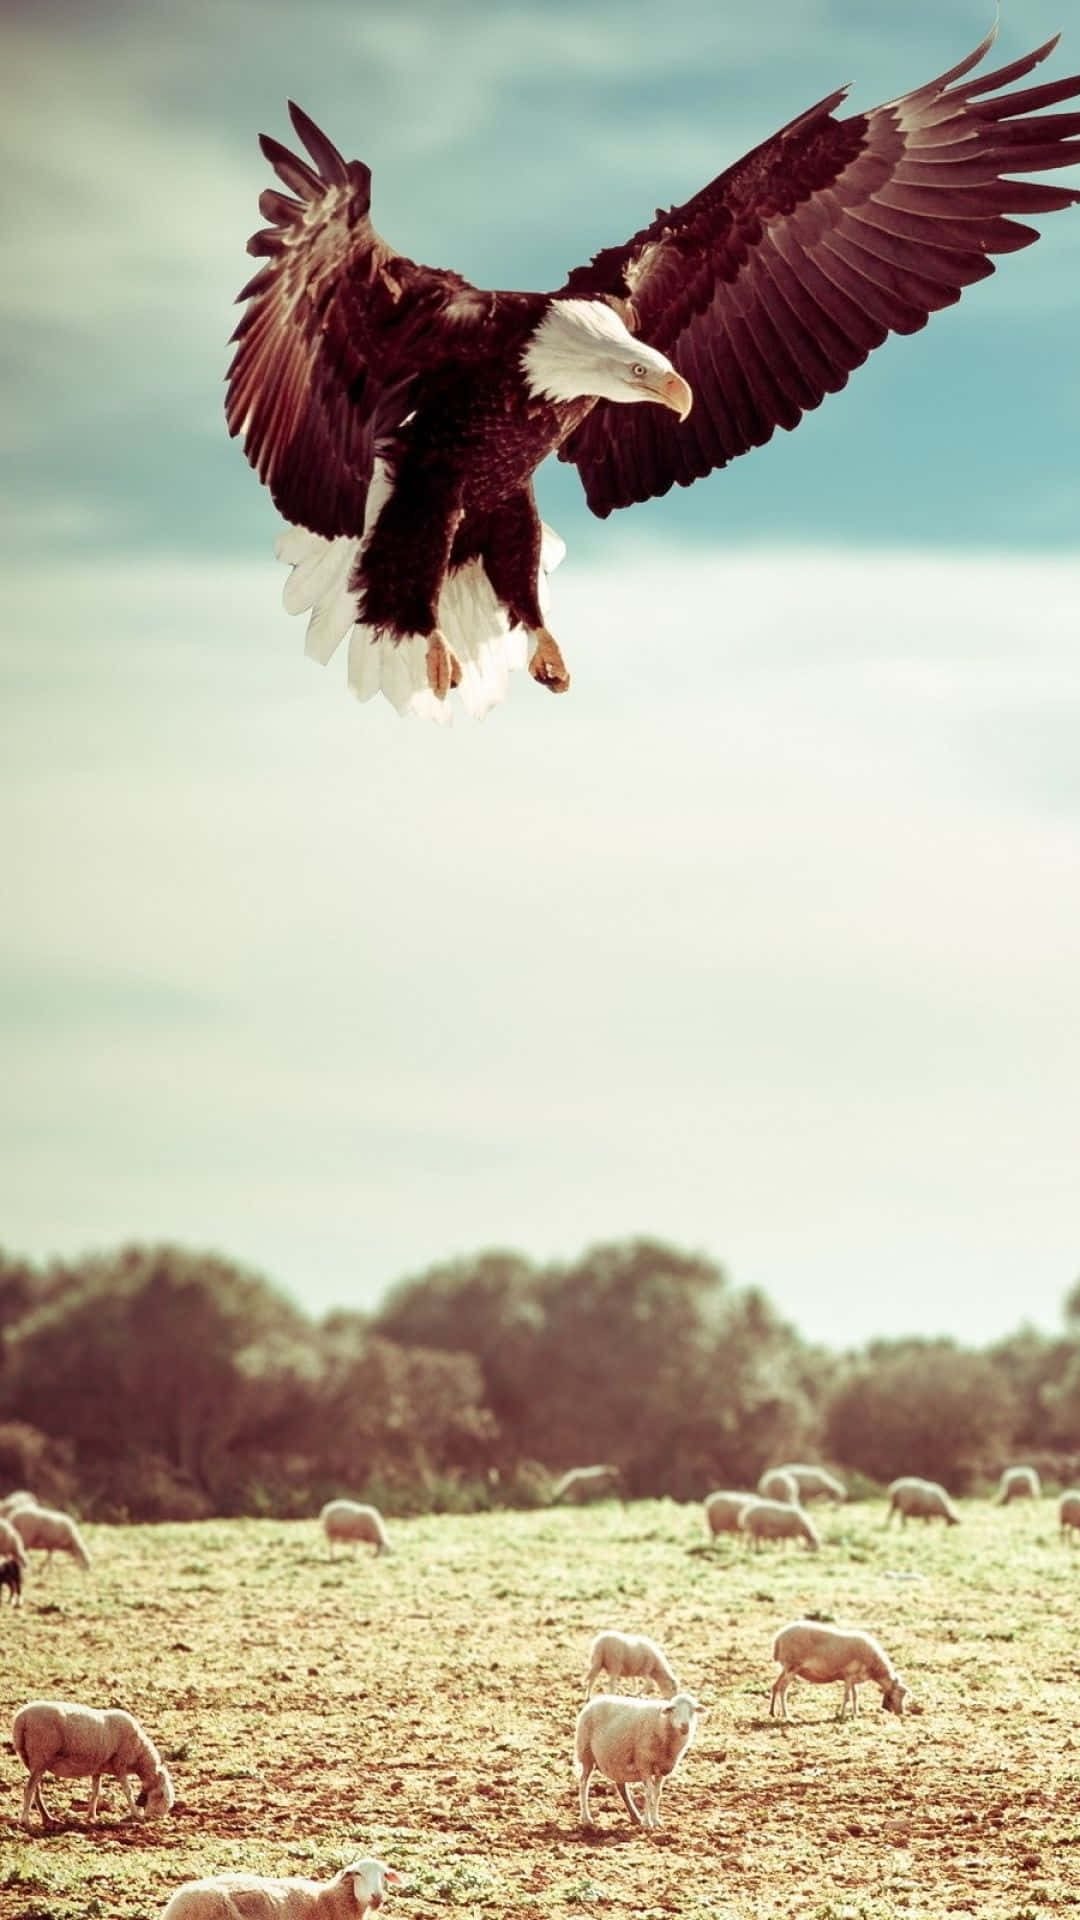 Eagle Hunting Iphone Wallpaper